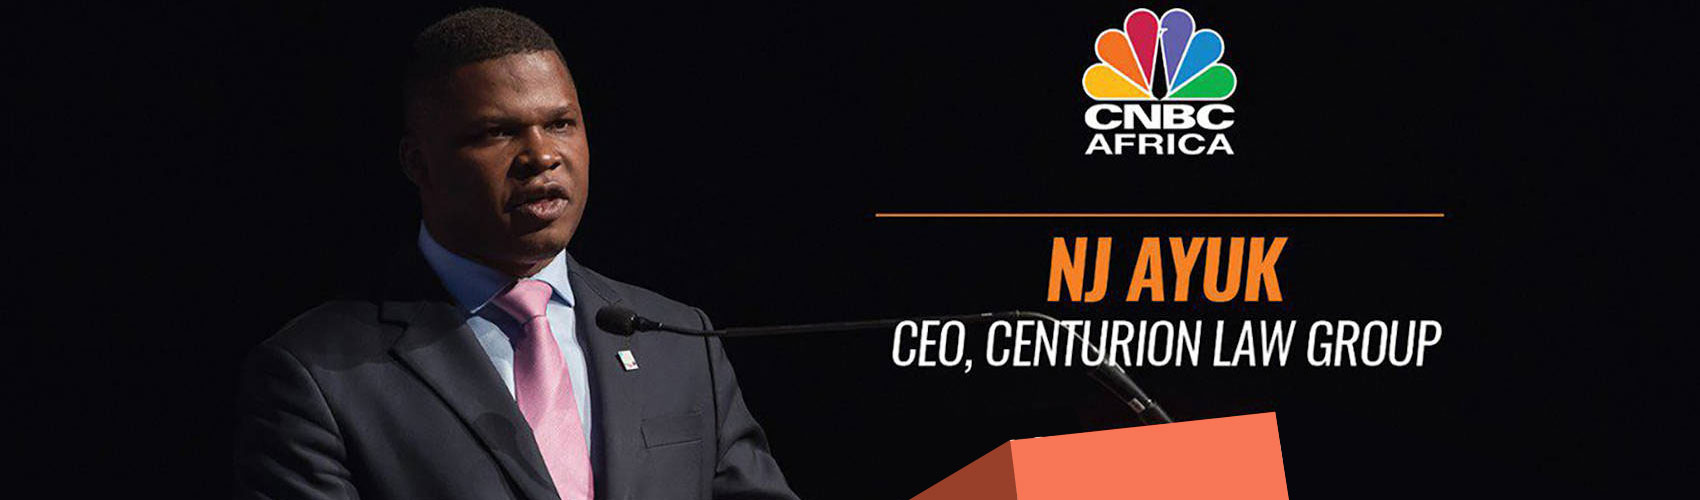 Mr. NJ Ayuk is the CEO of Centurion Law Group